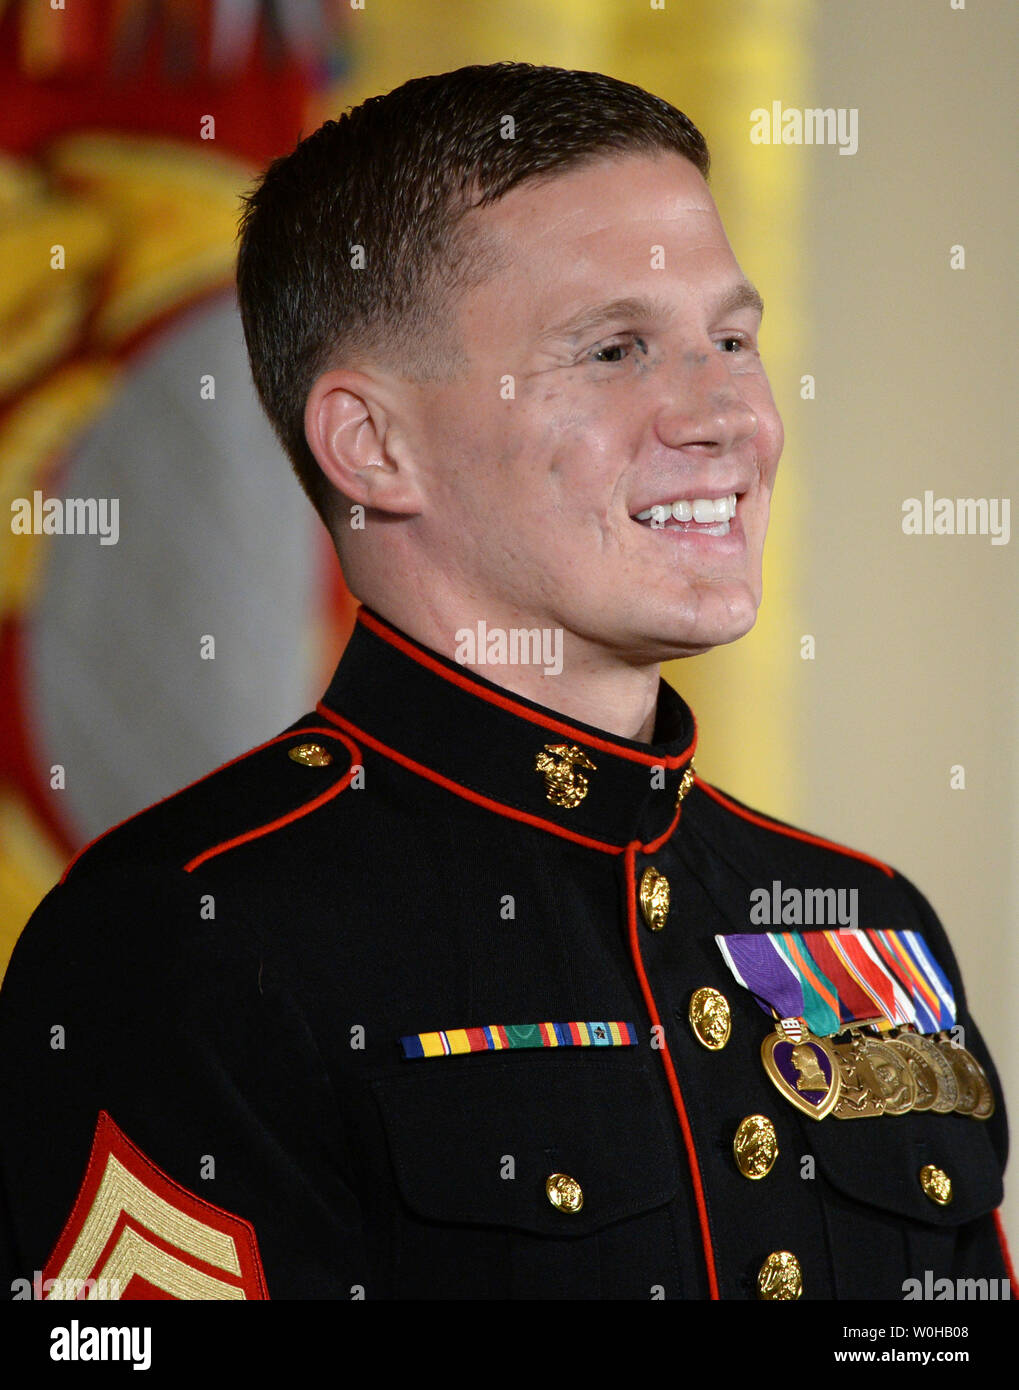 Retired Marine William 'Kyle' Carpenter smiles during comments by President Barack Obama prior to awarding him the  Medal of Honor in the East Room of the White House in Washington, DC on June 19, 2014.  Carpenter, 24, of Gilbert, South Carolina was awarded the nation's highest award for gallantry for covering a grenade with his body to save a Marine's life in Afghanistan in 2010.    UPI/Pat Benic Stock Photo